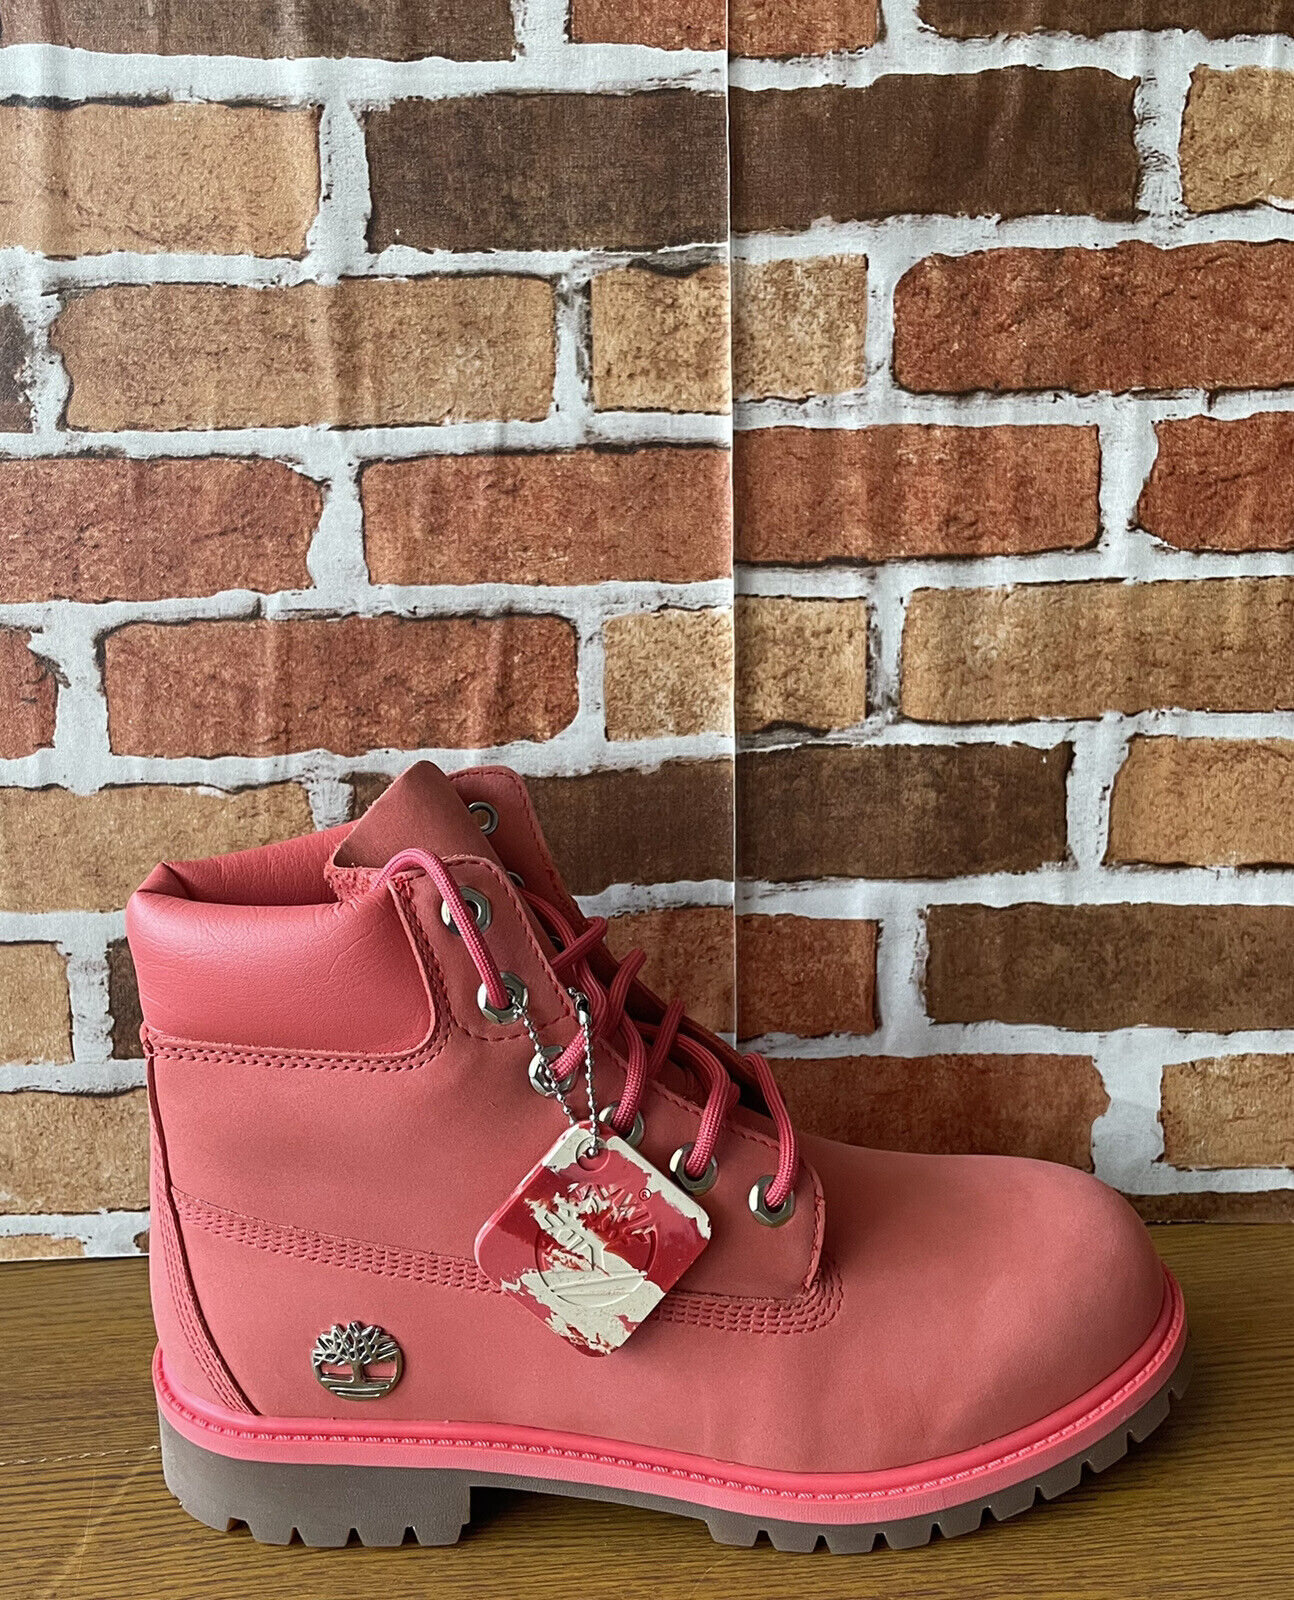 haag Uitputten gevogelte Timberland Youth's 6" Premium Boots NEW AUTHENTIC Pink Red Rose Sz 7  190852478635 | eBay